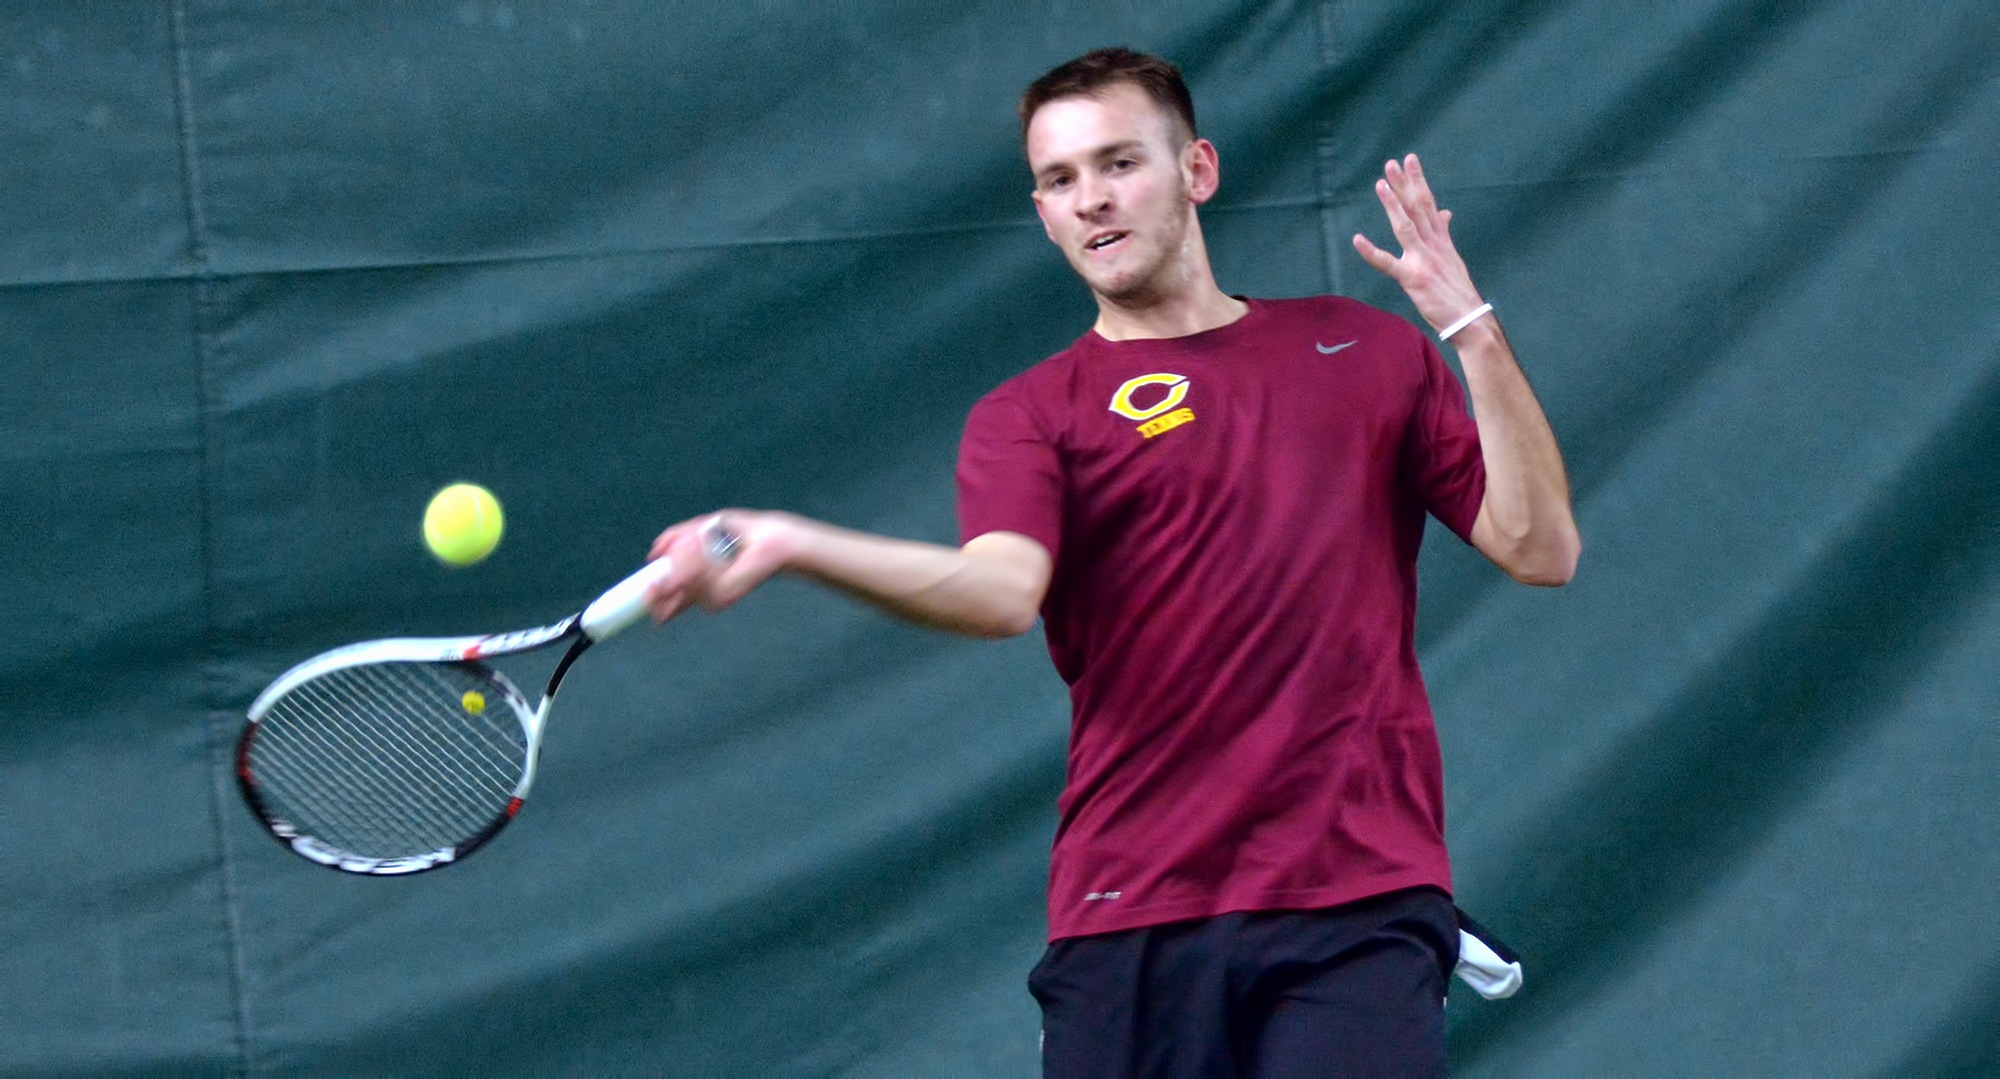 Senior David Youngs earned his team-leading fifth singles win of the year in the Cobbers' match at St. John's.